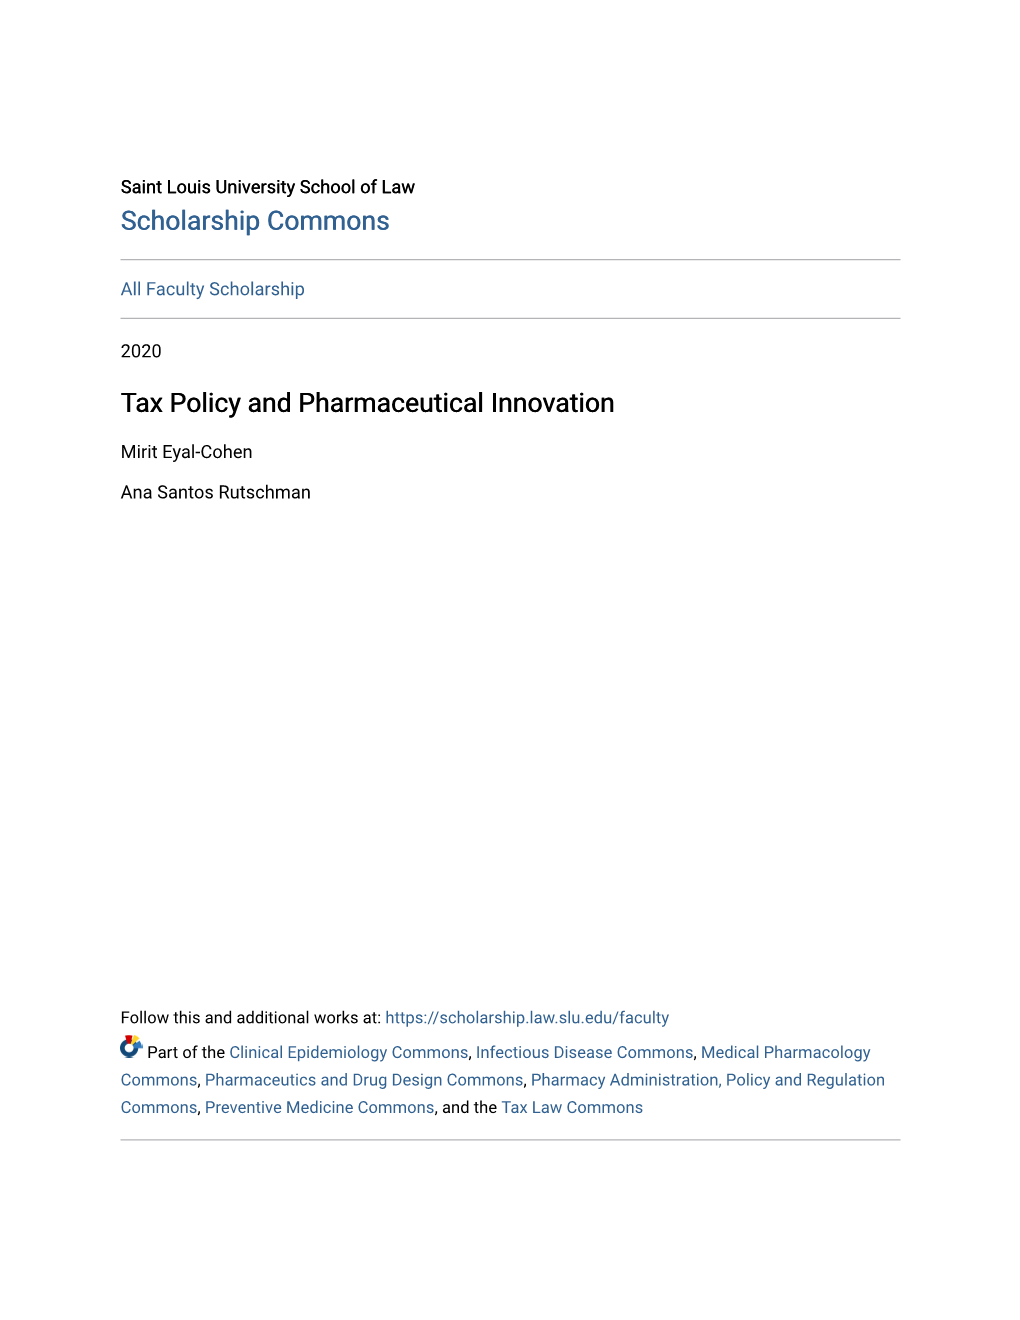 Tax Policy and Pharmaceutical Innovation